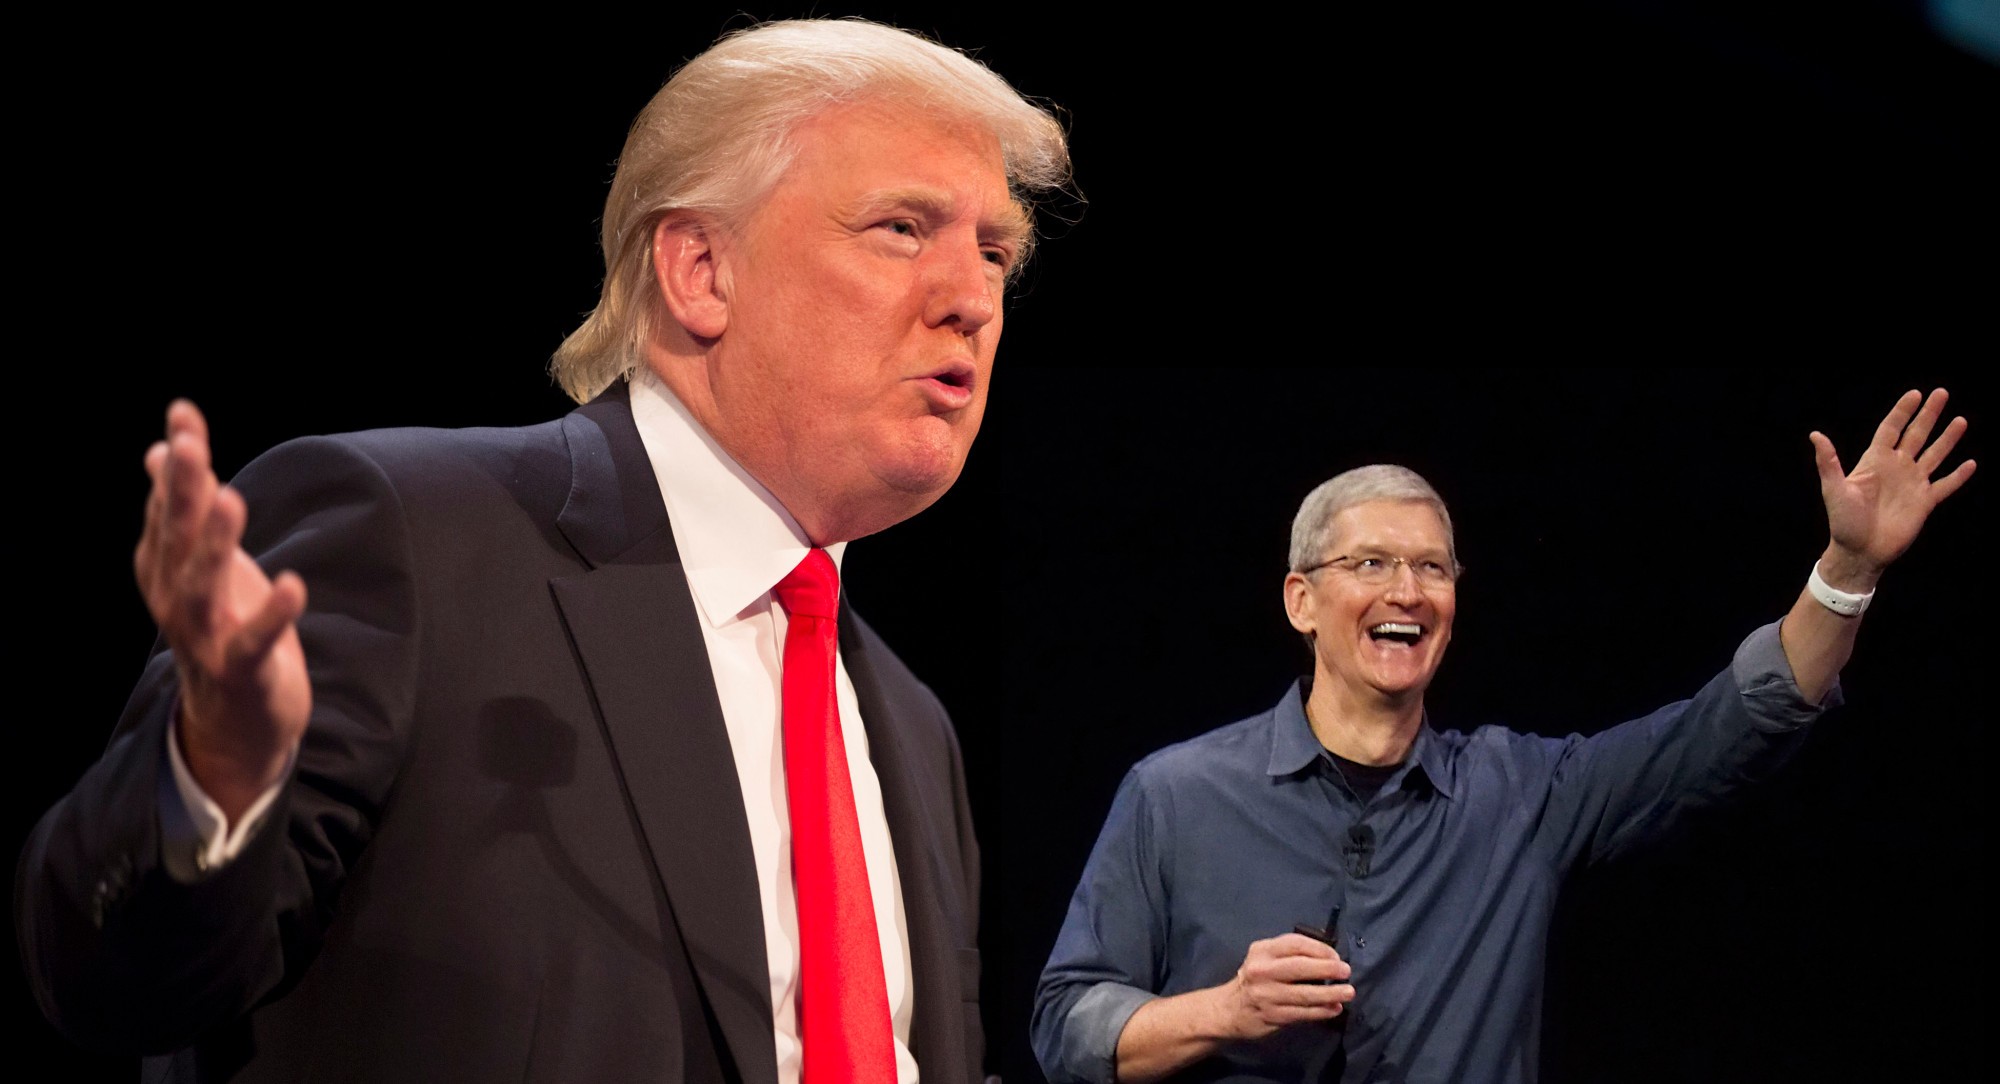 Tim Cook And Other Members Meet To Speak About Stopping Donald Trump